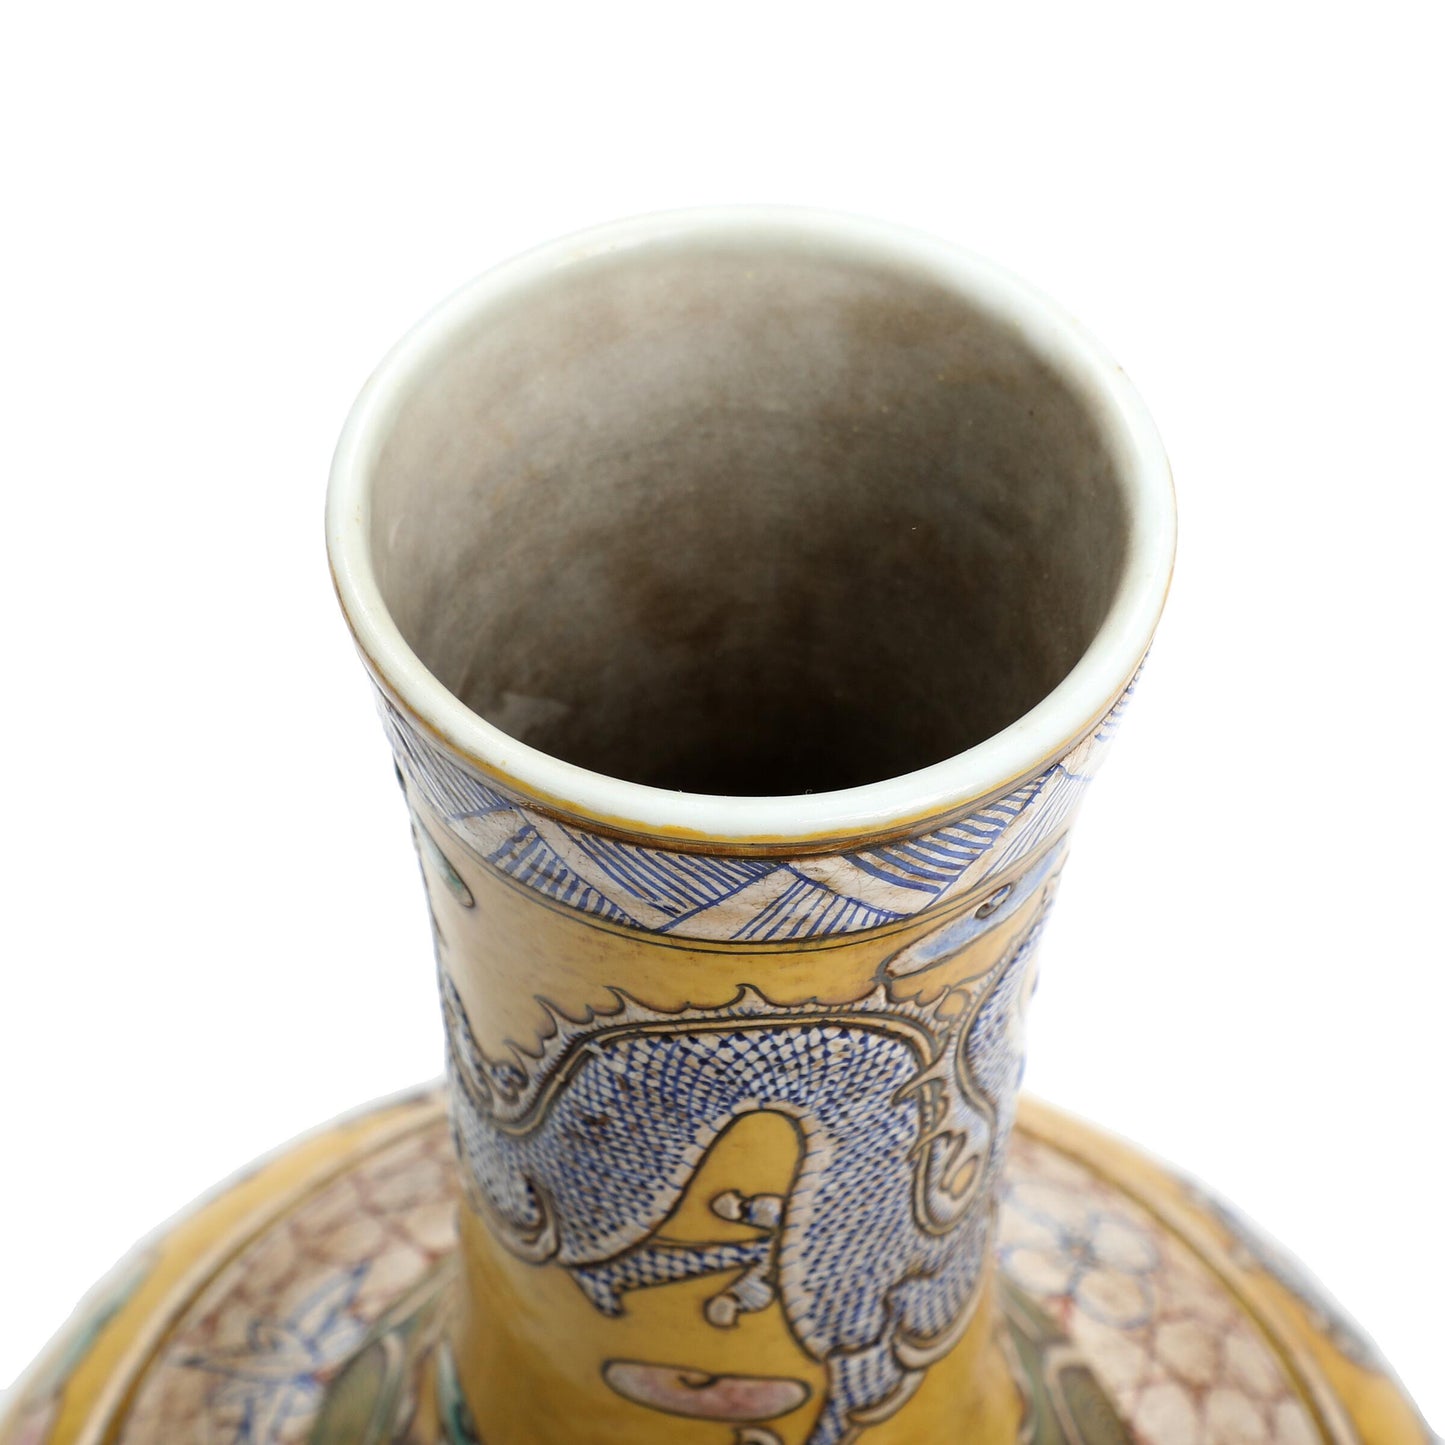 Chinese Porcelain Vase with Incredible Dragons - Kangxi Revival